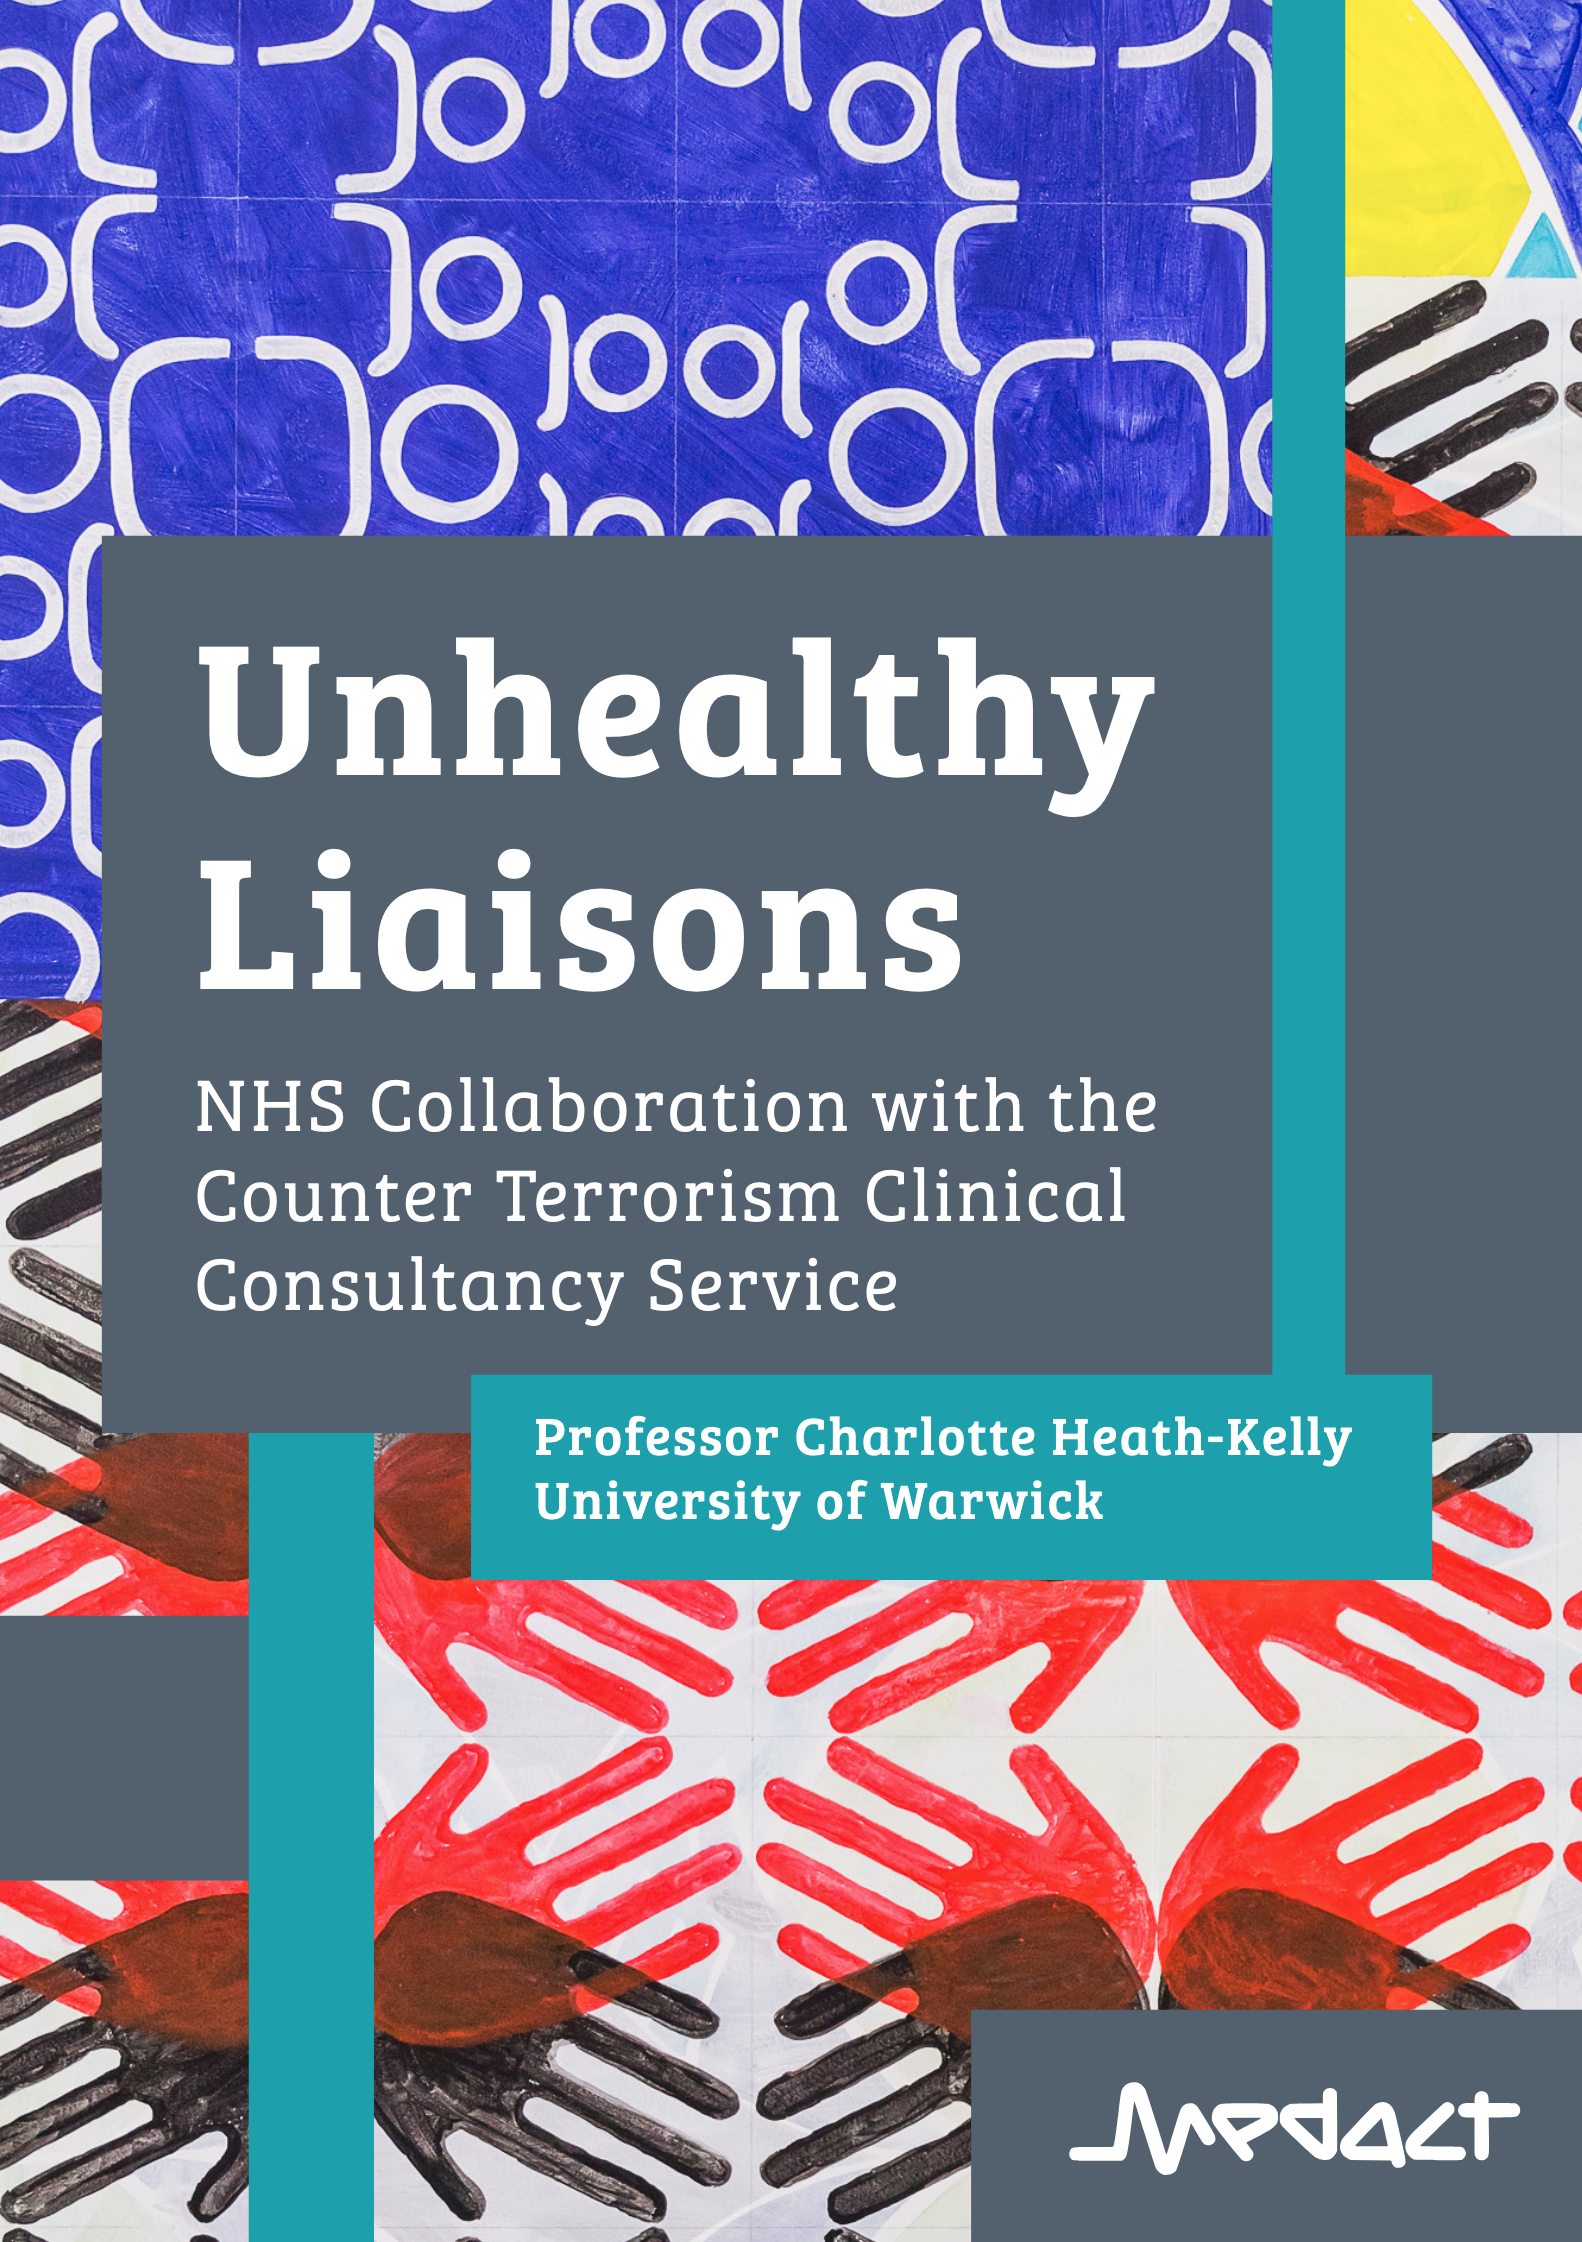 Unhealthy Liaisons: NHS Collaboration with the Counter Terrorism Clinical Consultancy Service